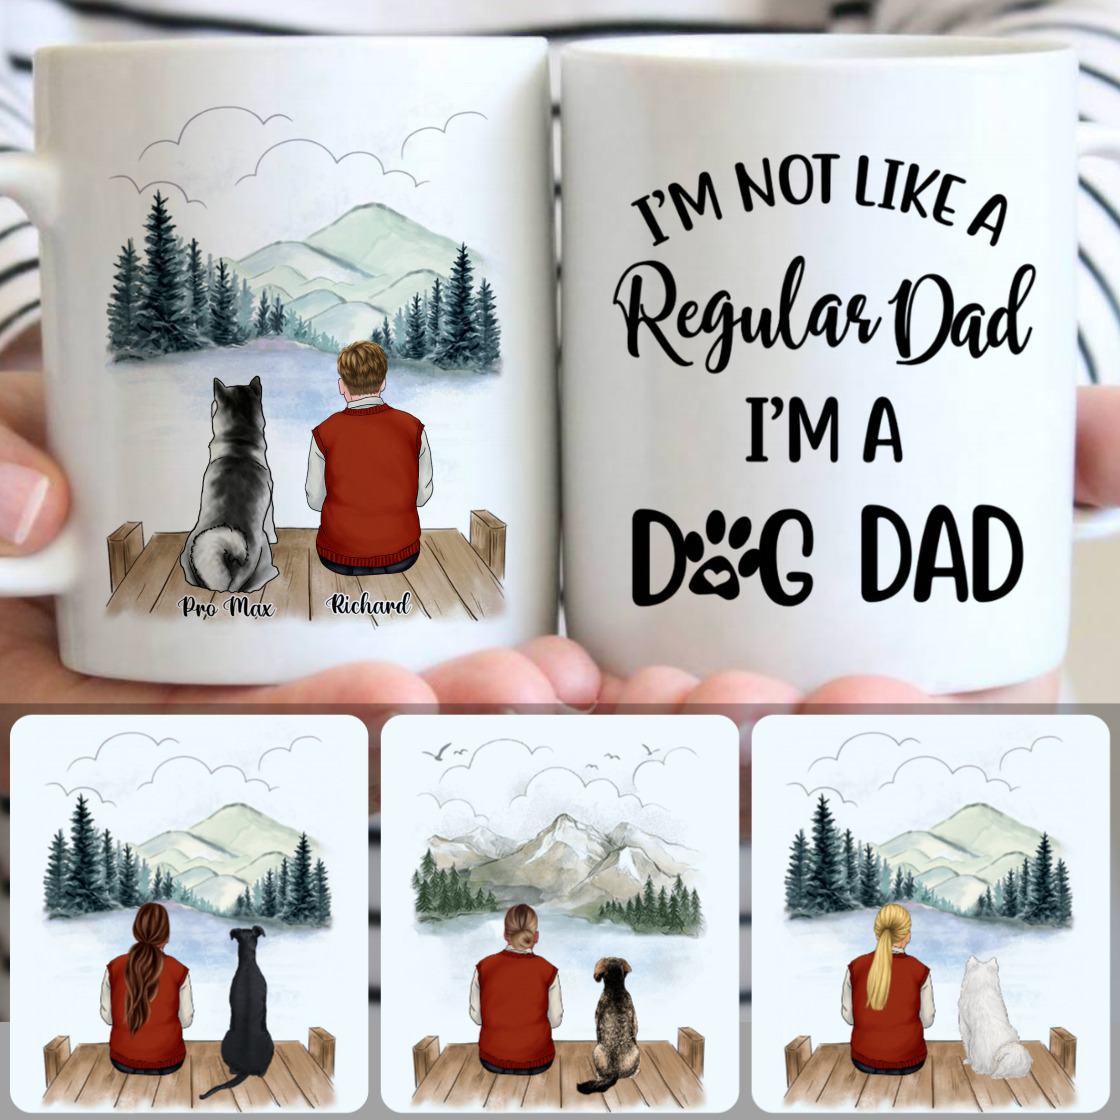 Personalized Mug, Best Gifts For Dog Dad, Old Man & Dog Customized Coffee Mug With Names